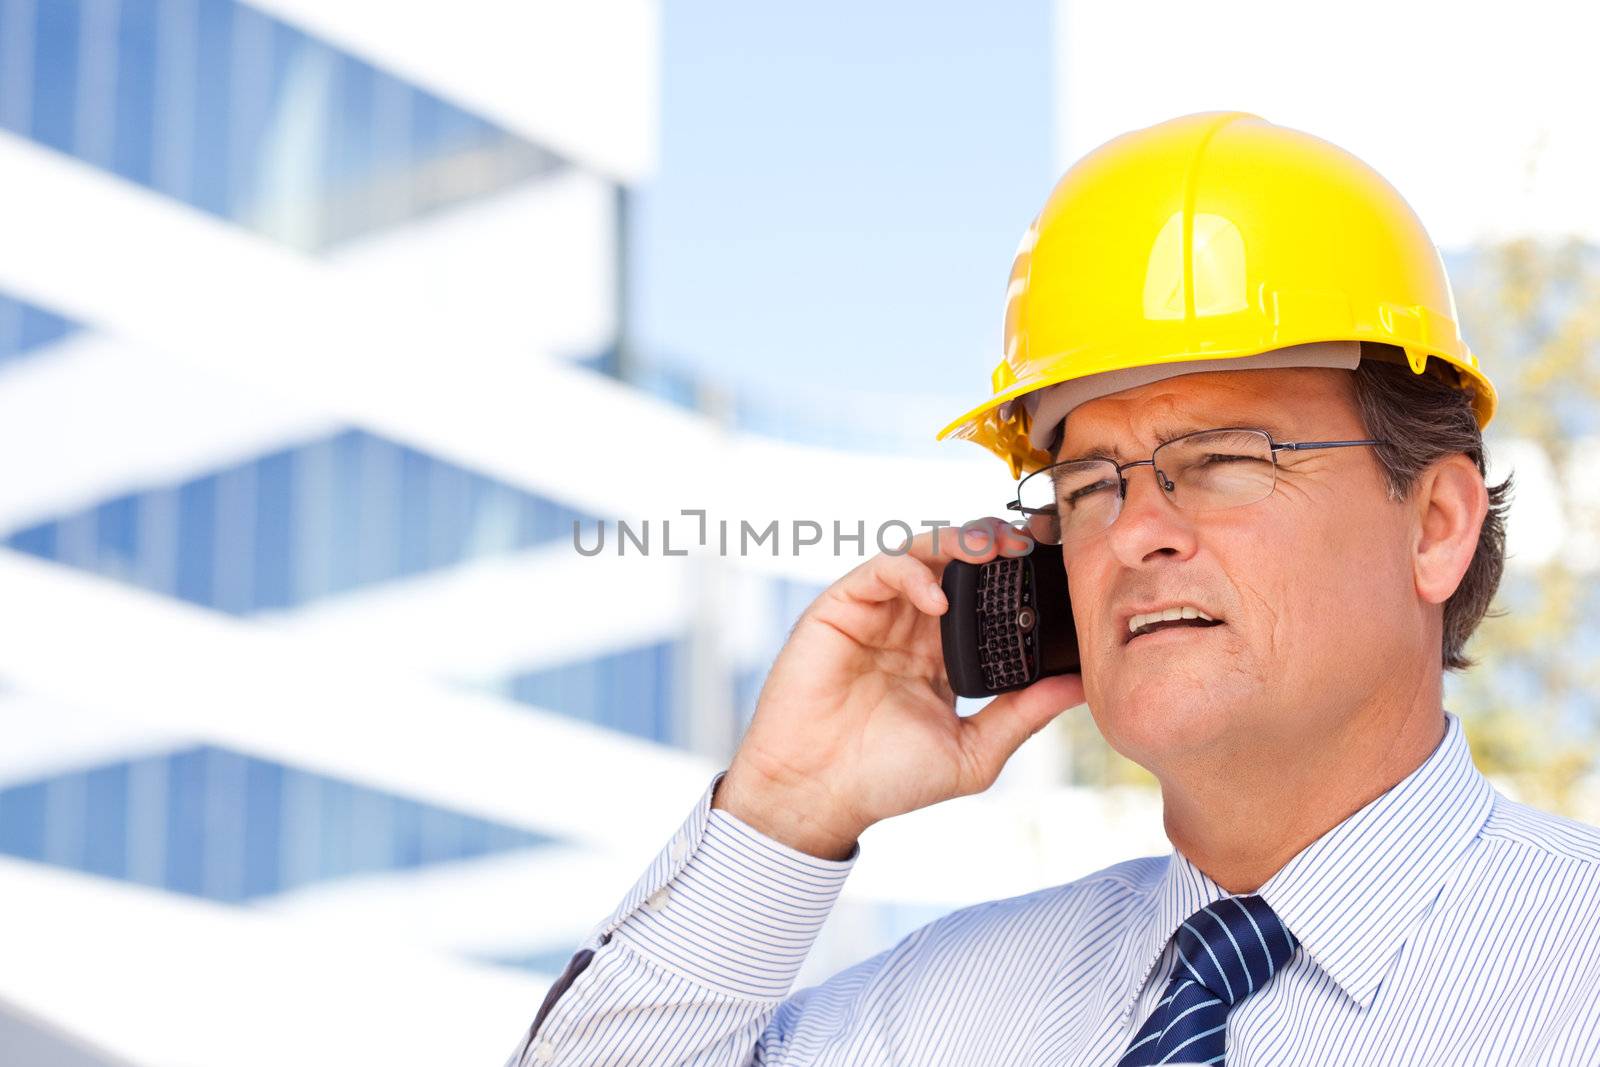 Contractor in Hardhat and Necktie Talks on His Cell Phone by Feverpitched